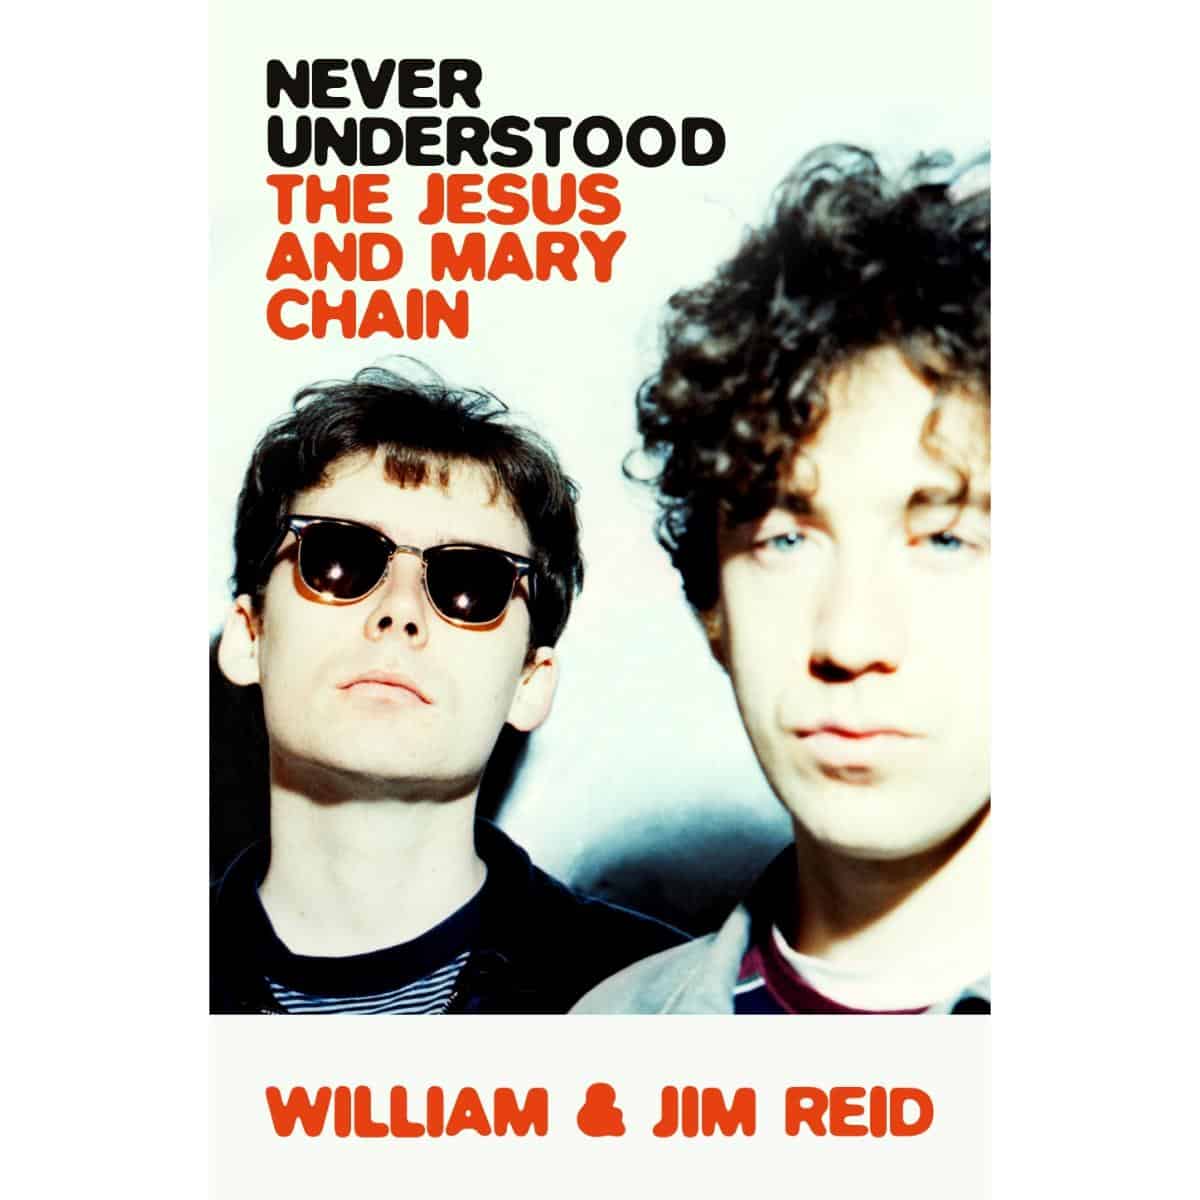 the-jesus-and-mary-chain-never-understood-book-coverart